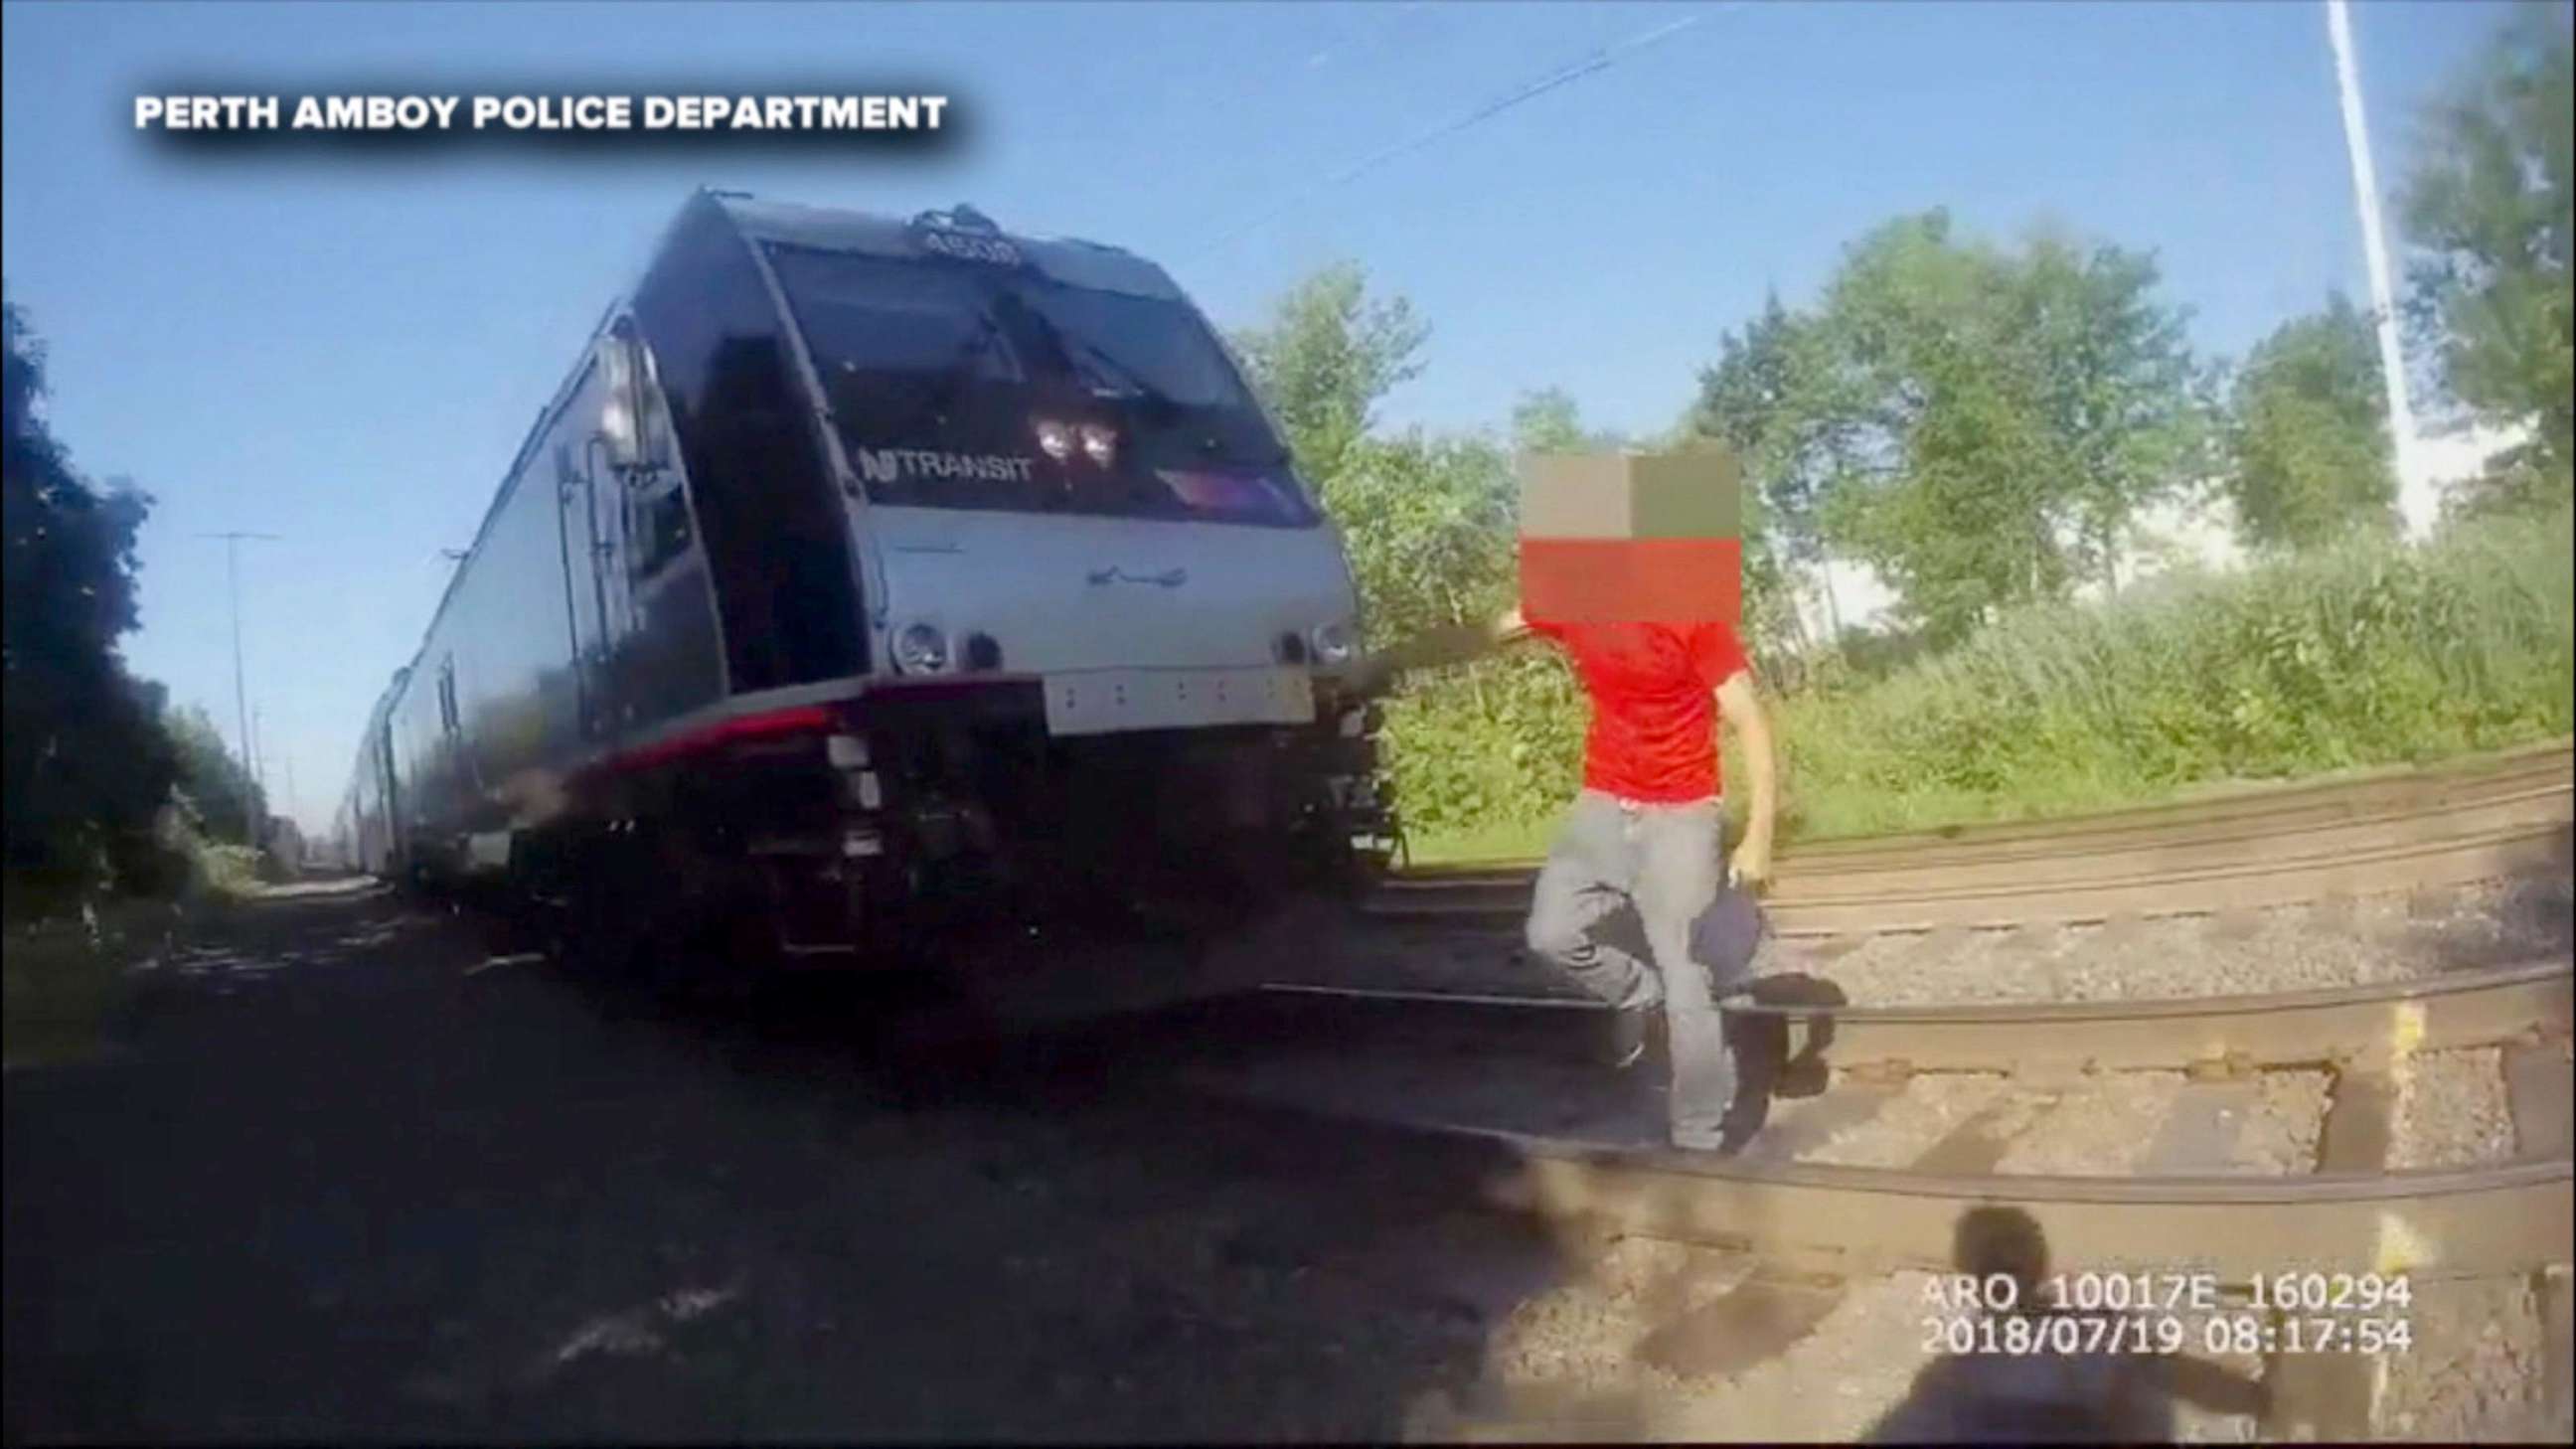 PHOTO: Perth Amboy Police Officer Kyle Savoia's body camera captures footage of his life saving actions, July 19, 2018, as he saved a man who was just moments away from being struck by a moving train.